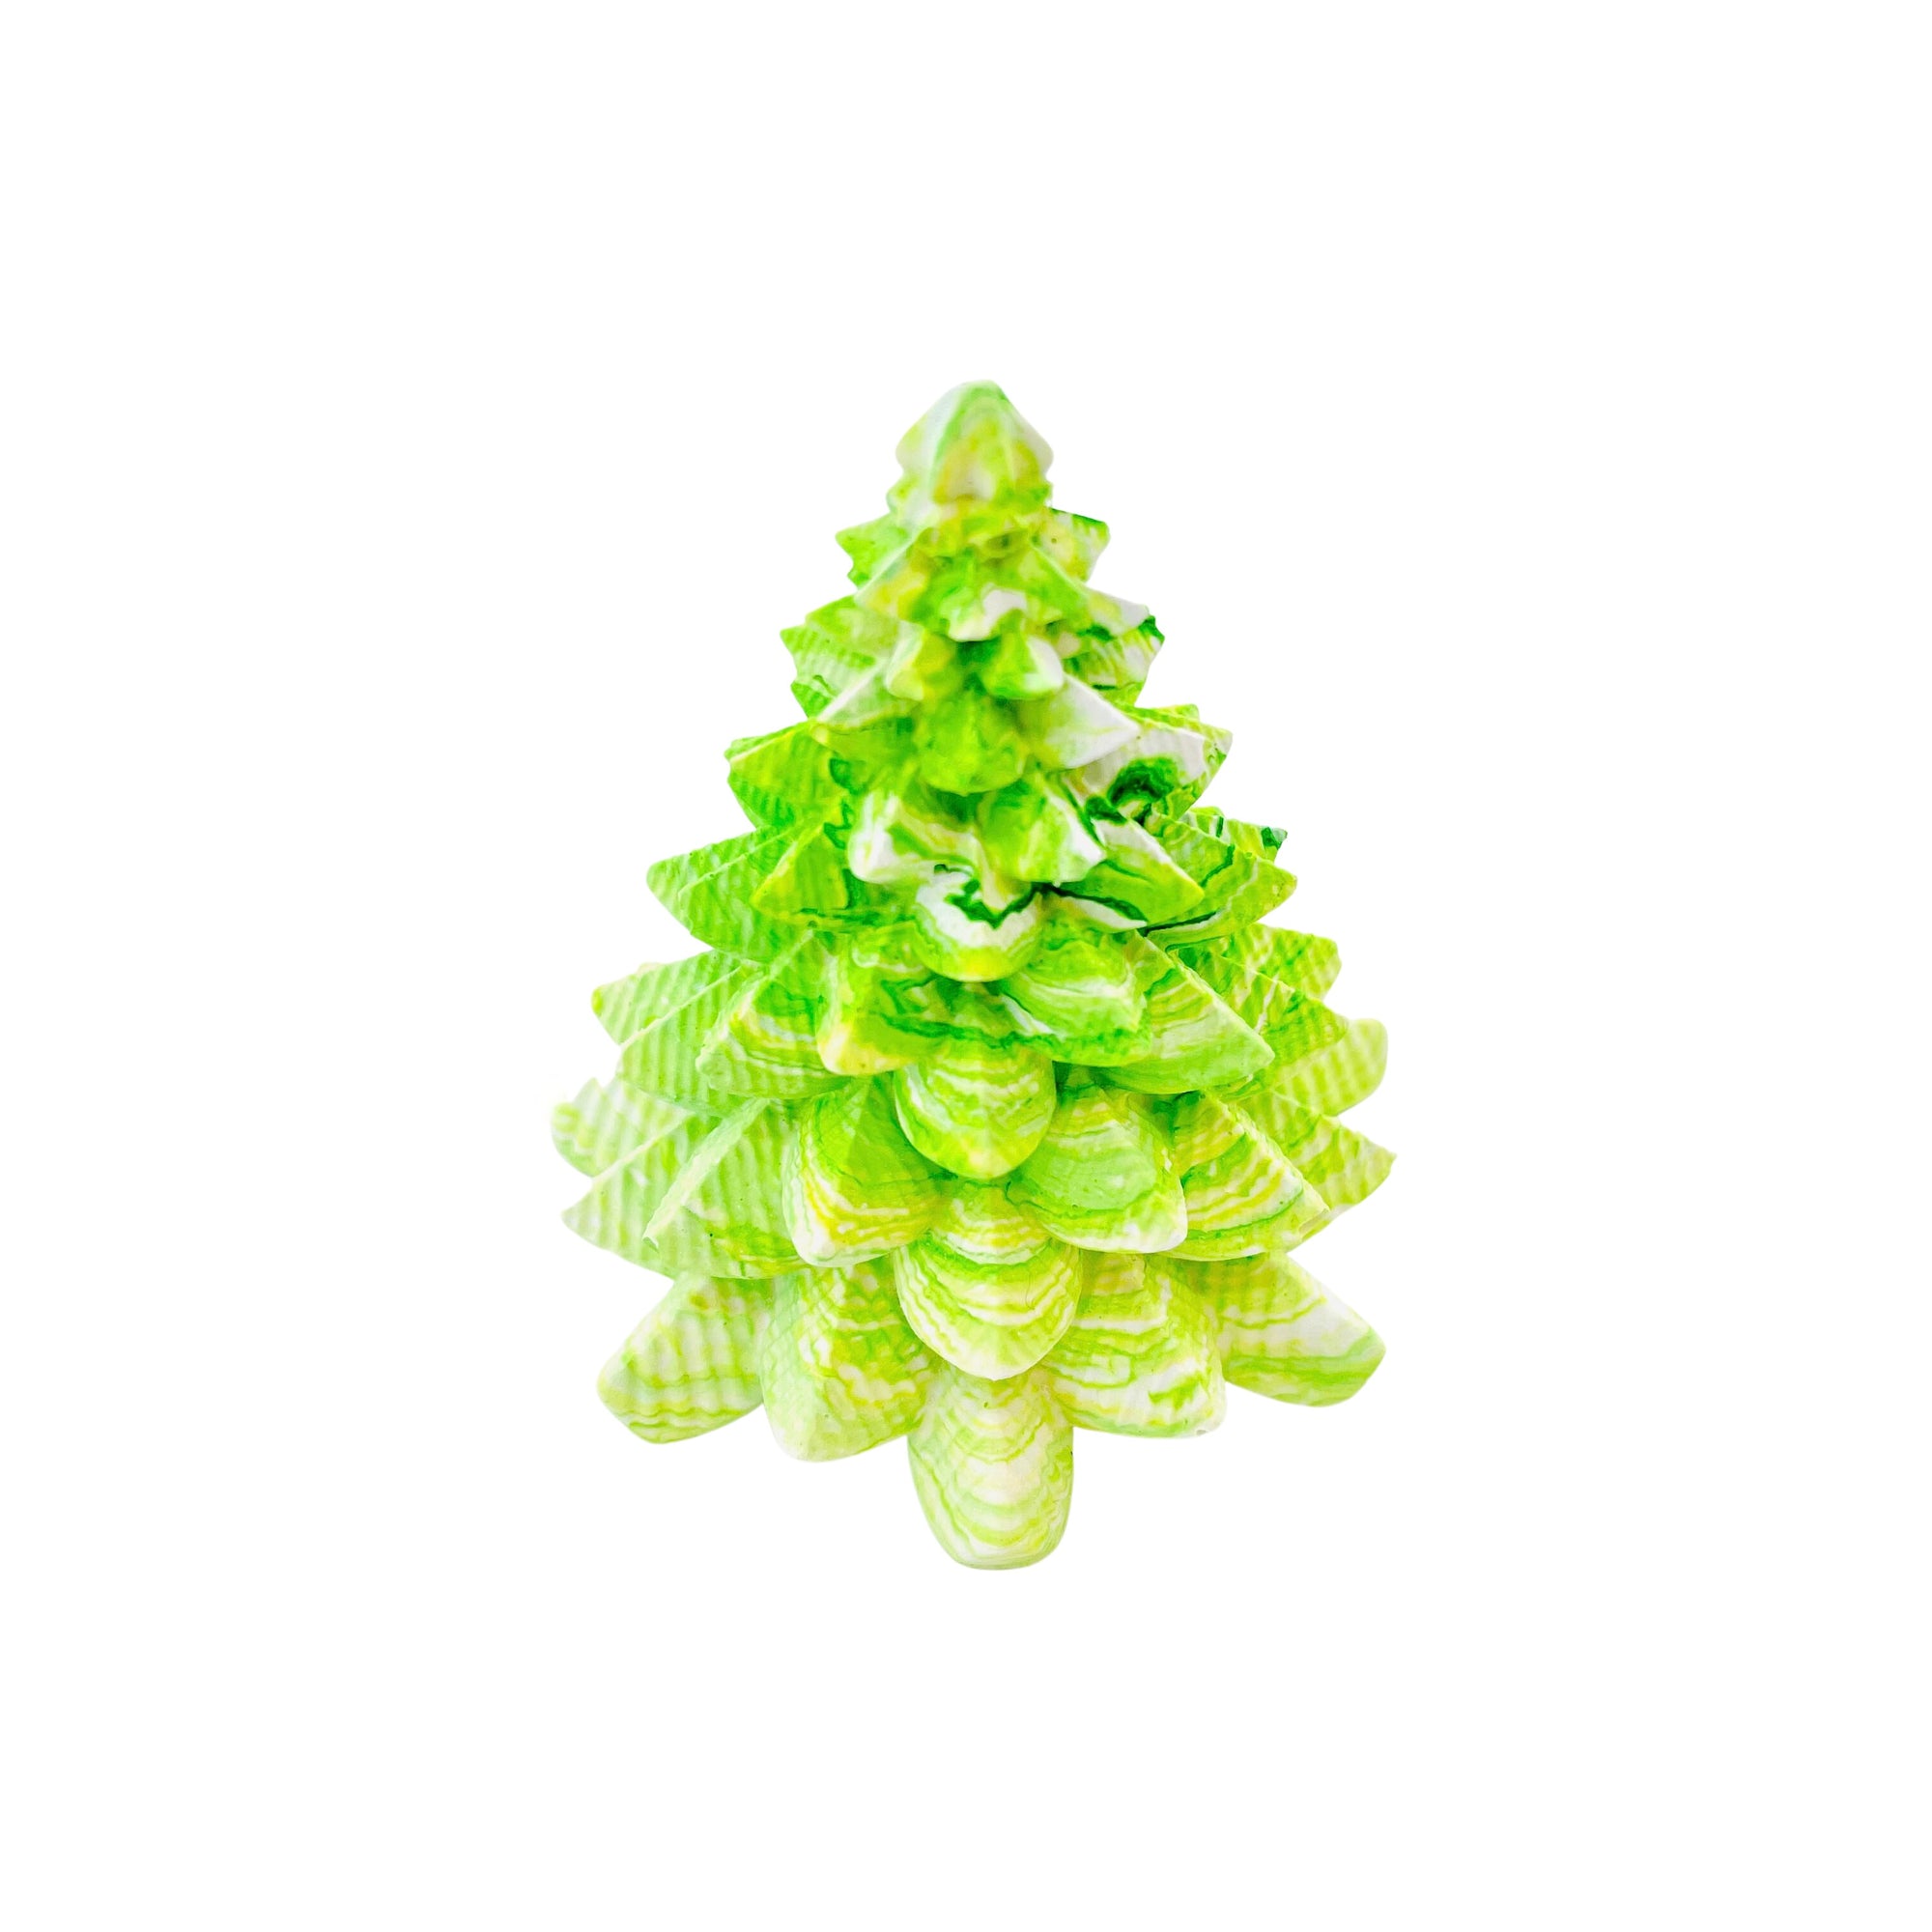 A small Jesmonite Christmas tree measuring 8.5cm tall and 7.5cm wide marbled with lime green  pigment.